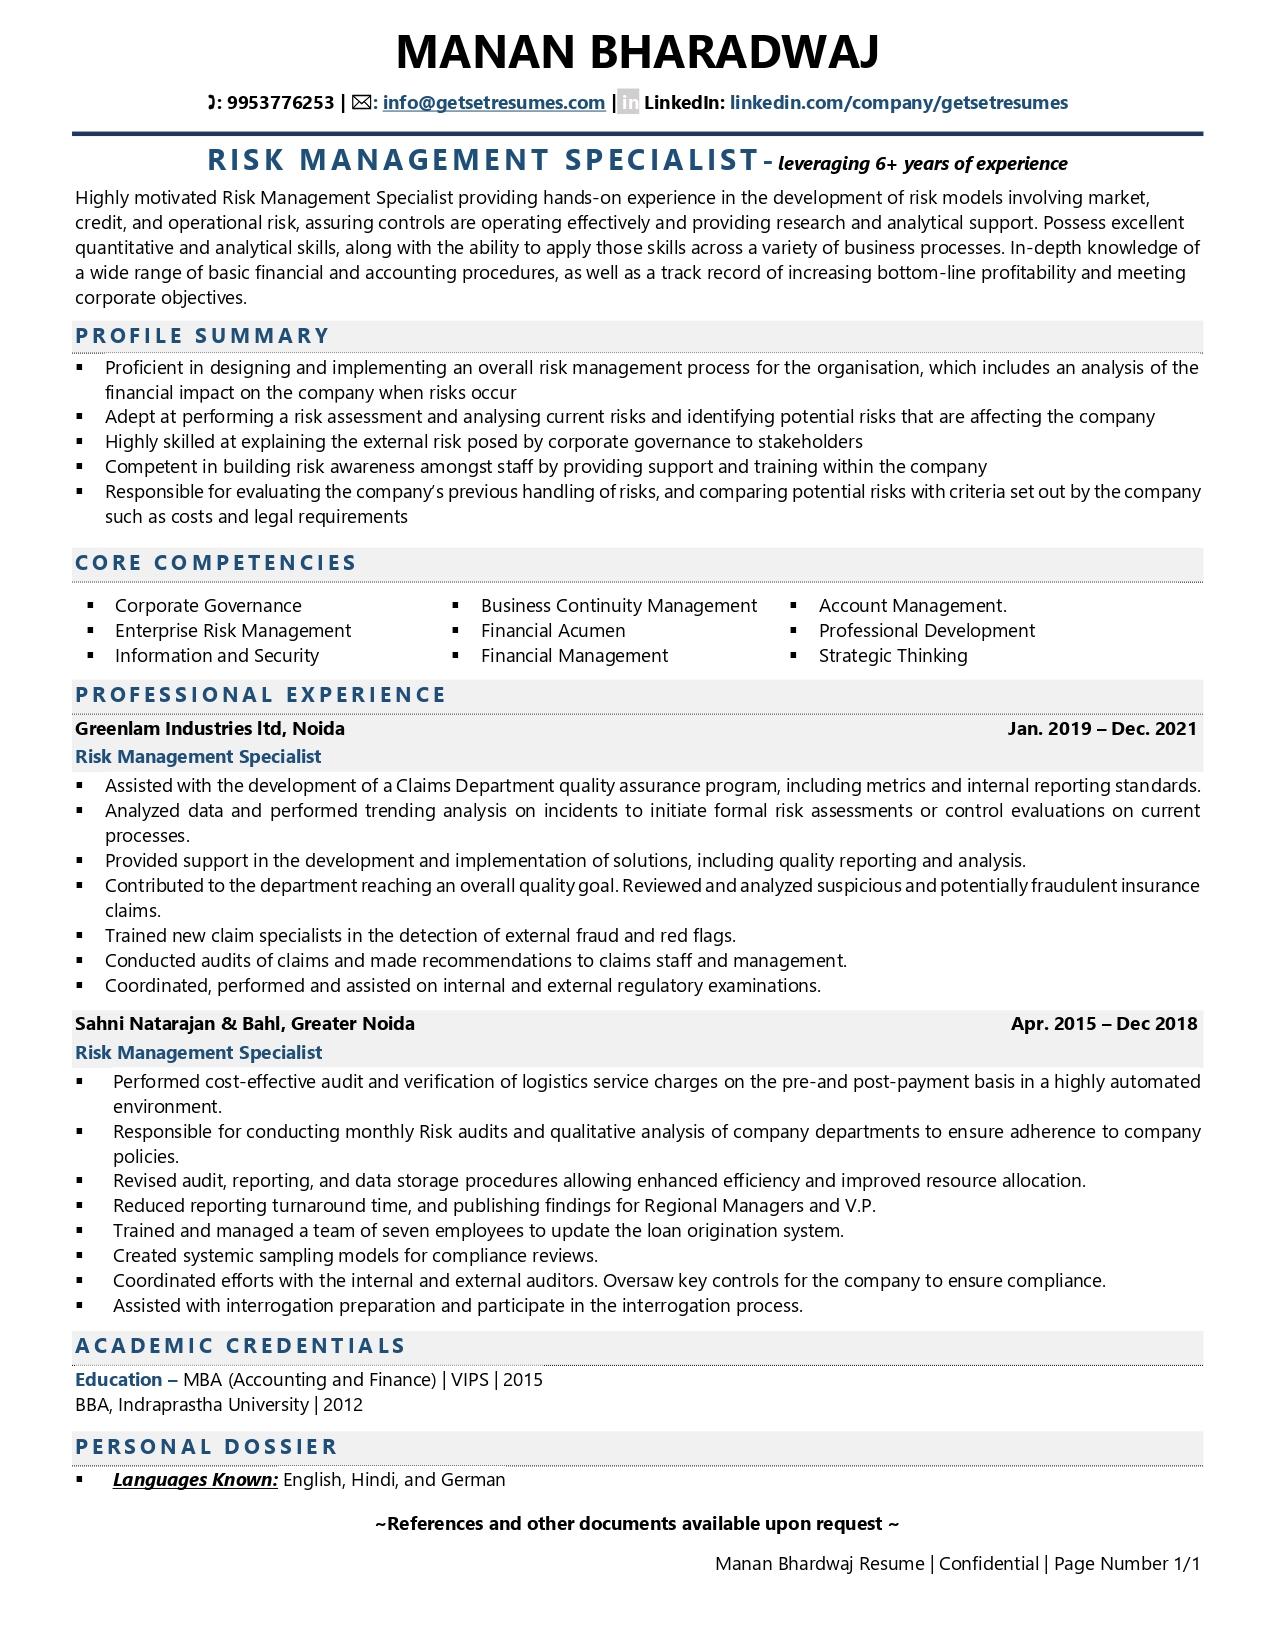 Risk Management Specialist - Resume Example & Template